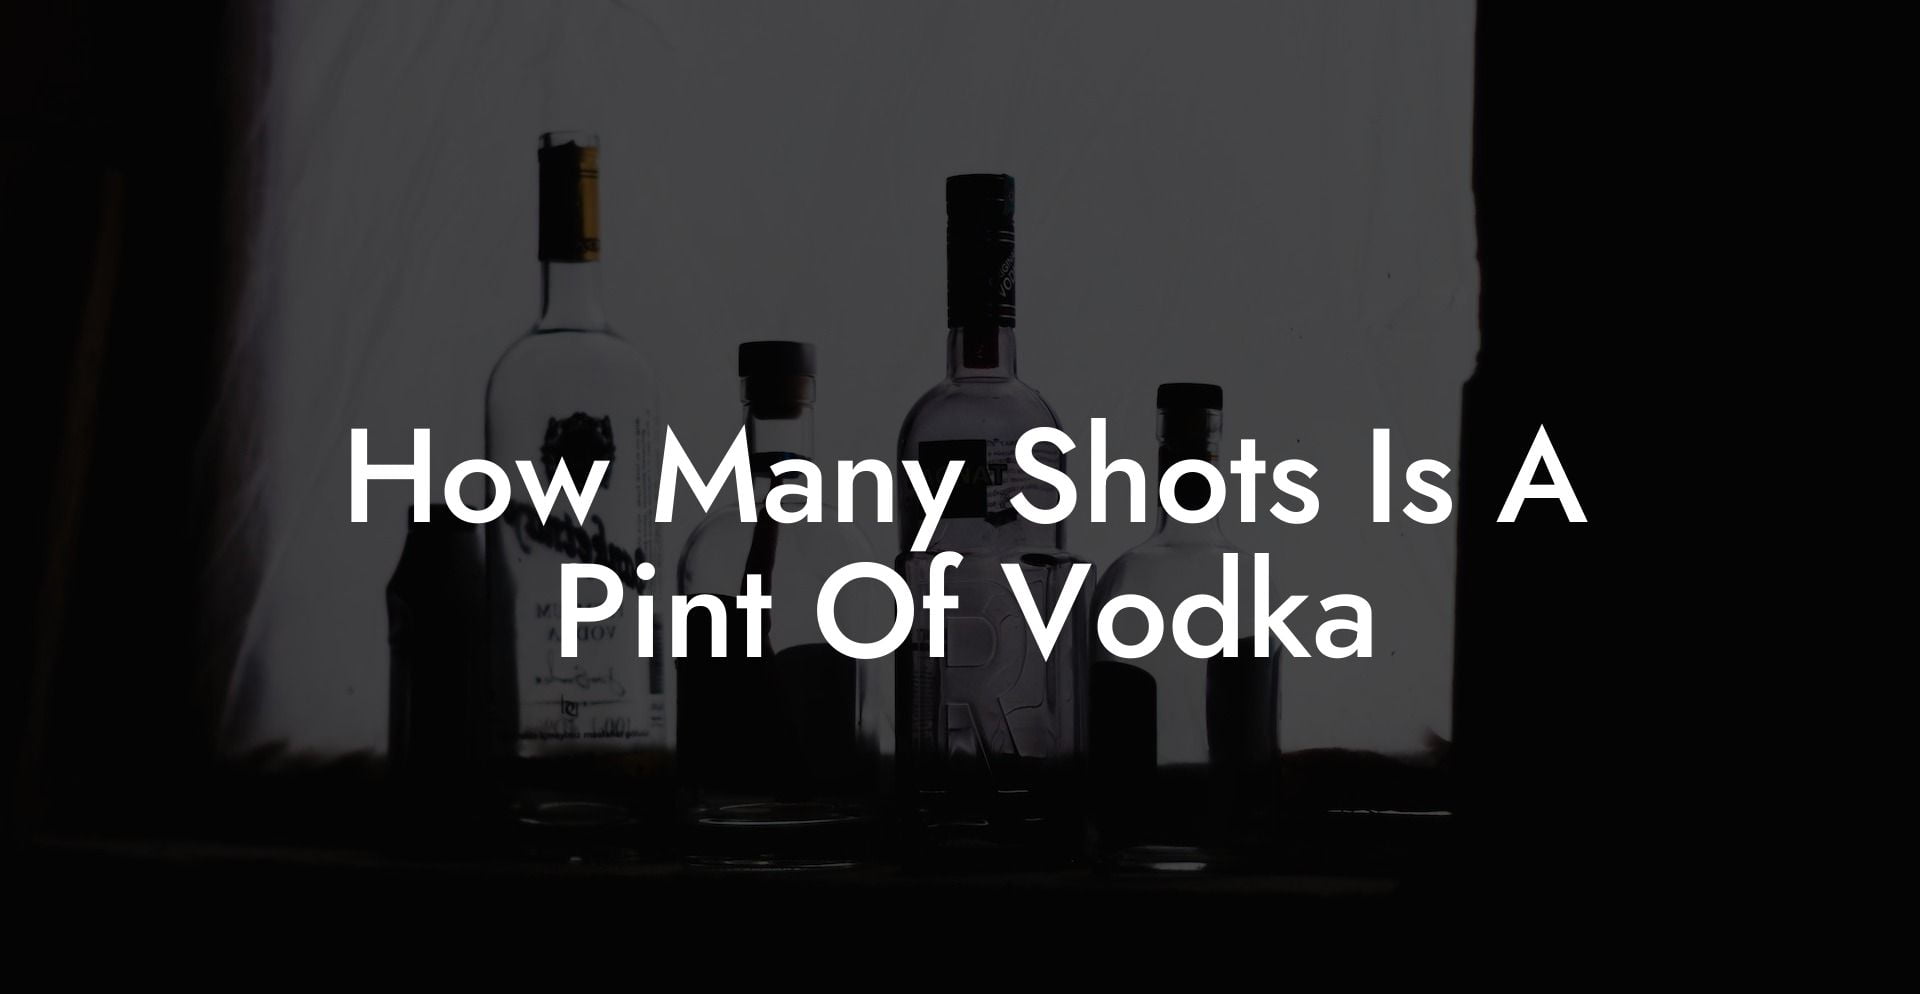 How Many Shots Is A Pint Of Vodka